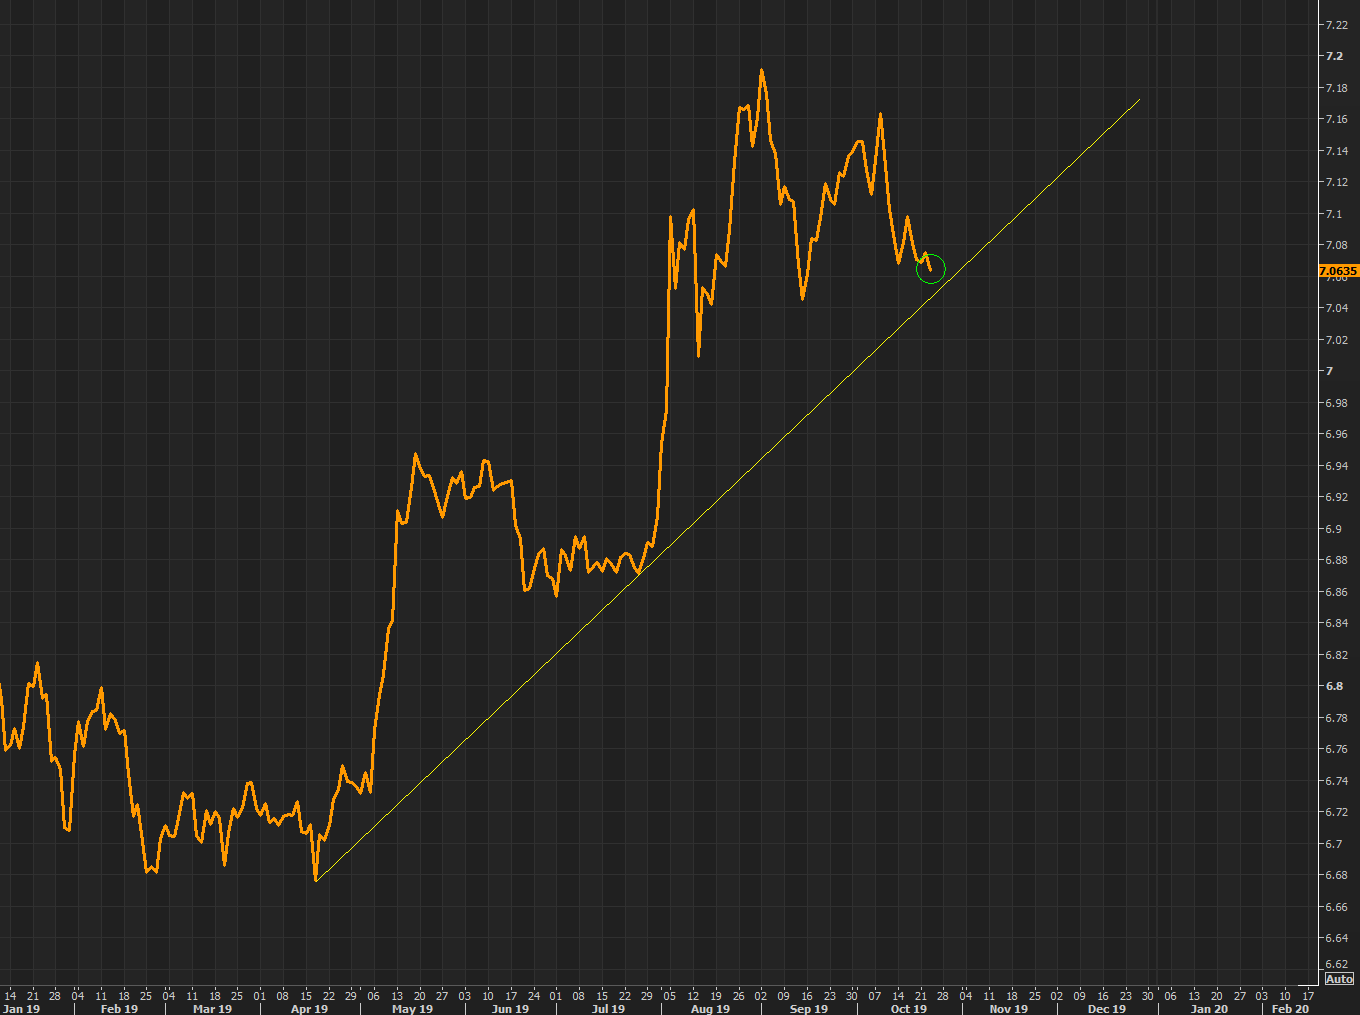 Yuan at strongest levels since mid September